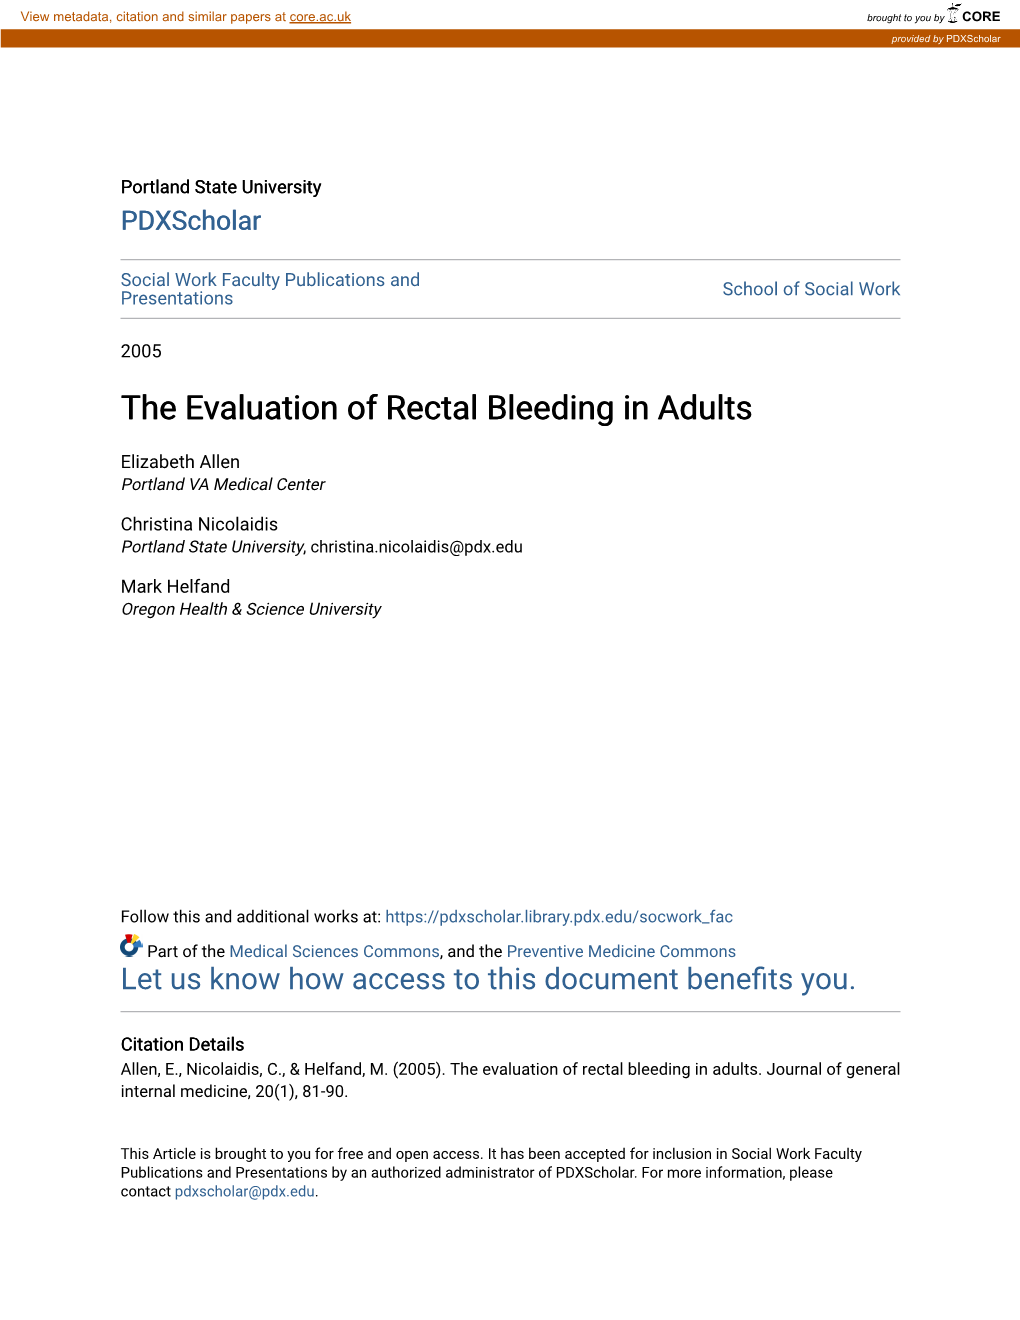 The Evaluation of Rectal Bleeding in Adults